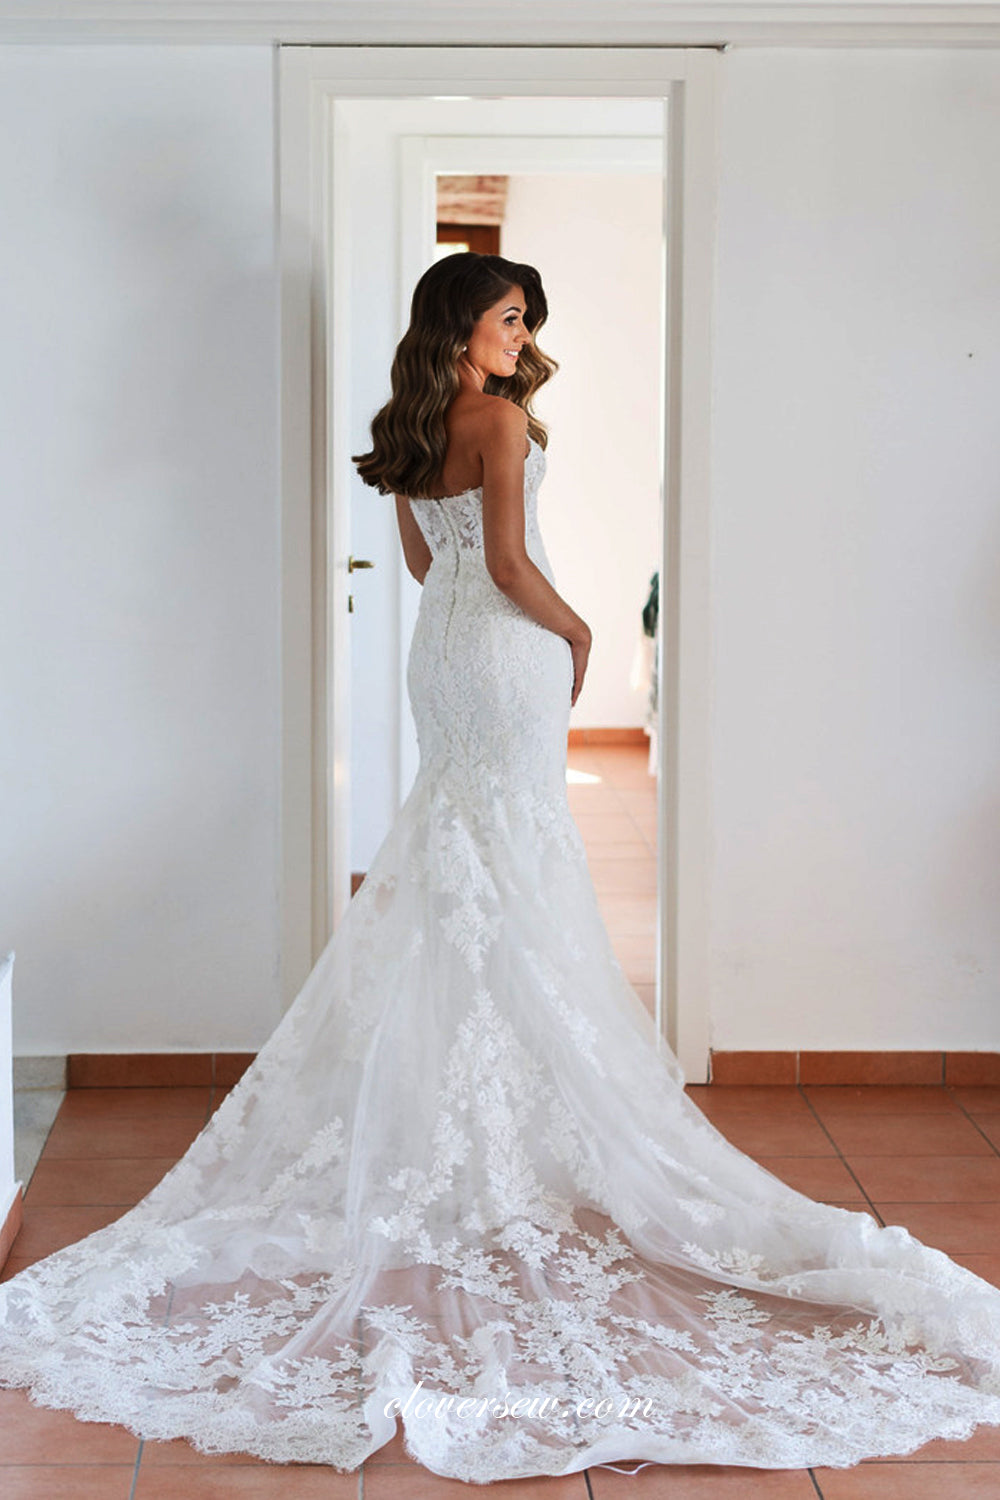 Fully Lace Applique Sweetheart Strapless With Stunning Train Wedding Dresses, CW0310